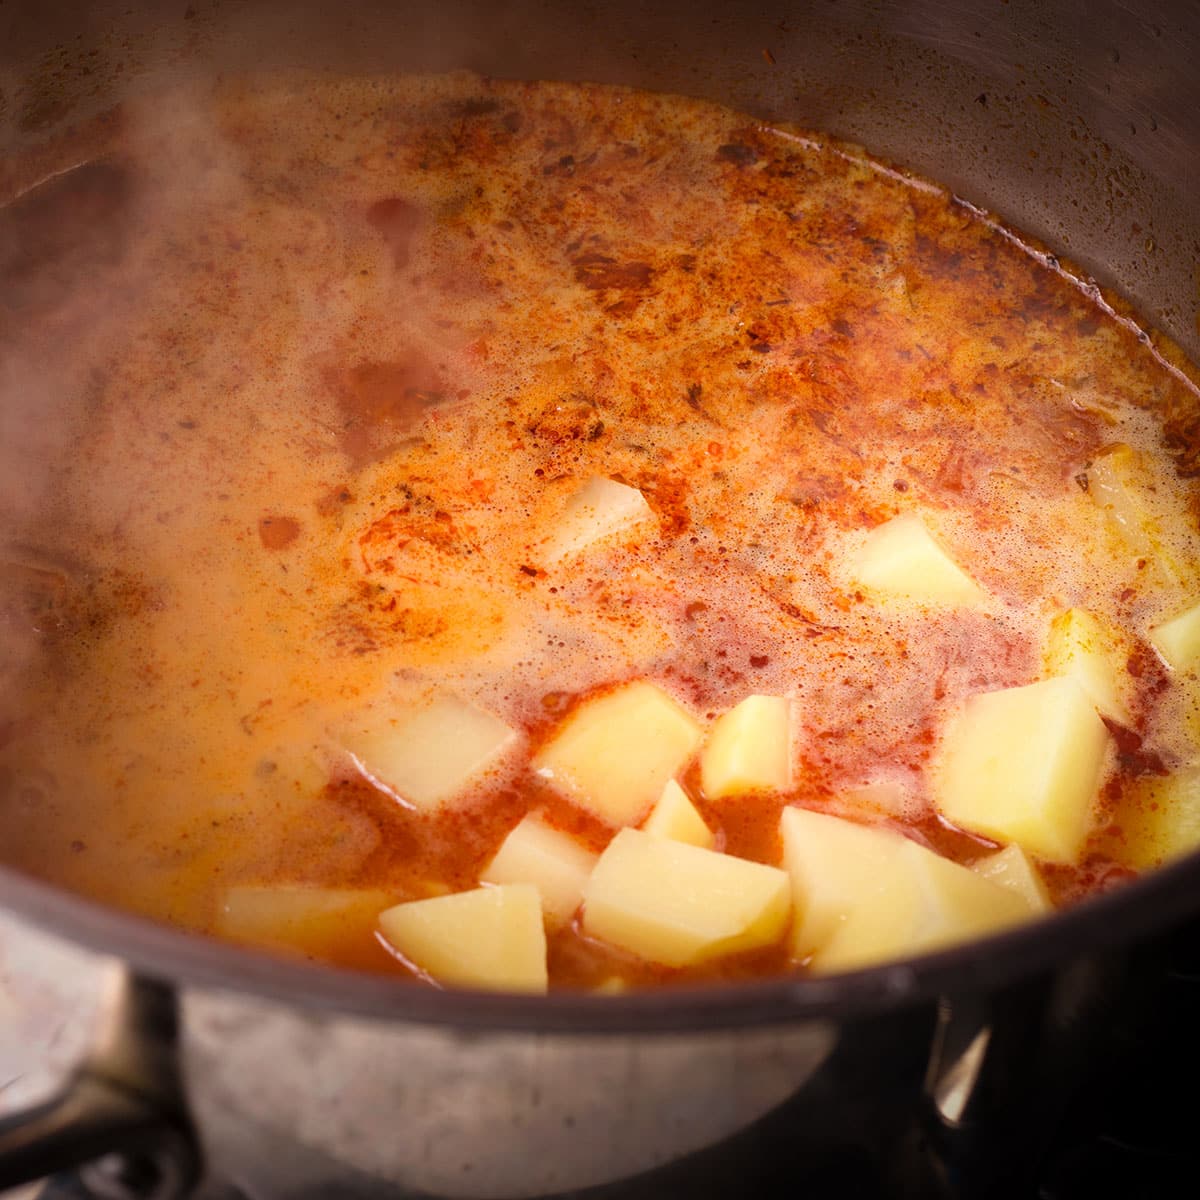 Add the potatoes to the broth.